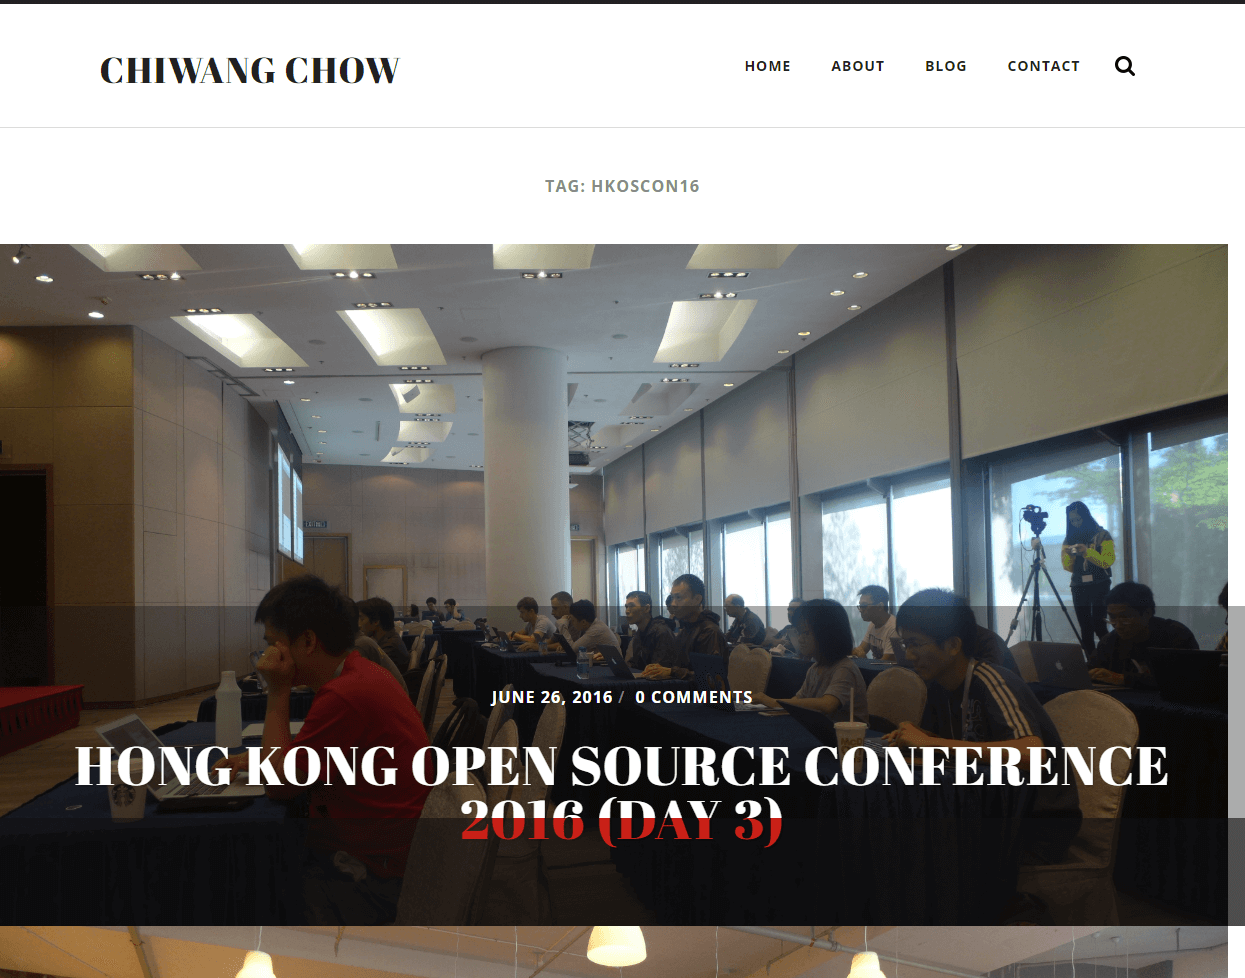 HONG KONG OPEN SOURCE CONFERENCE 2016 (DAY 1-3)